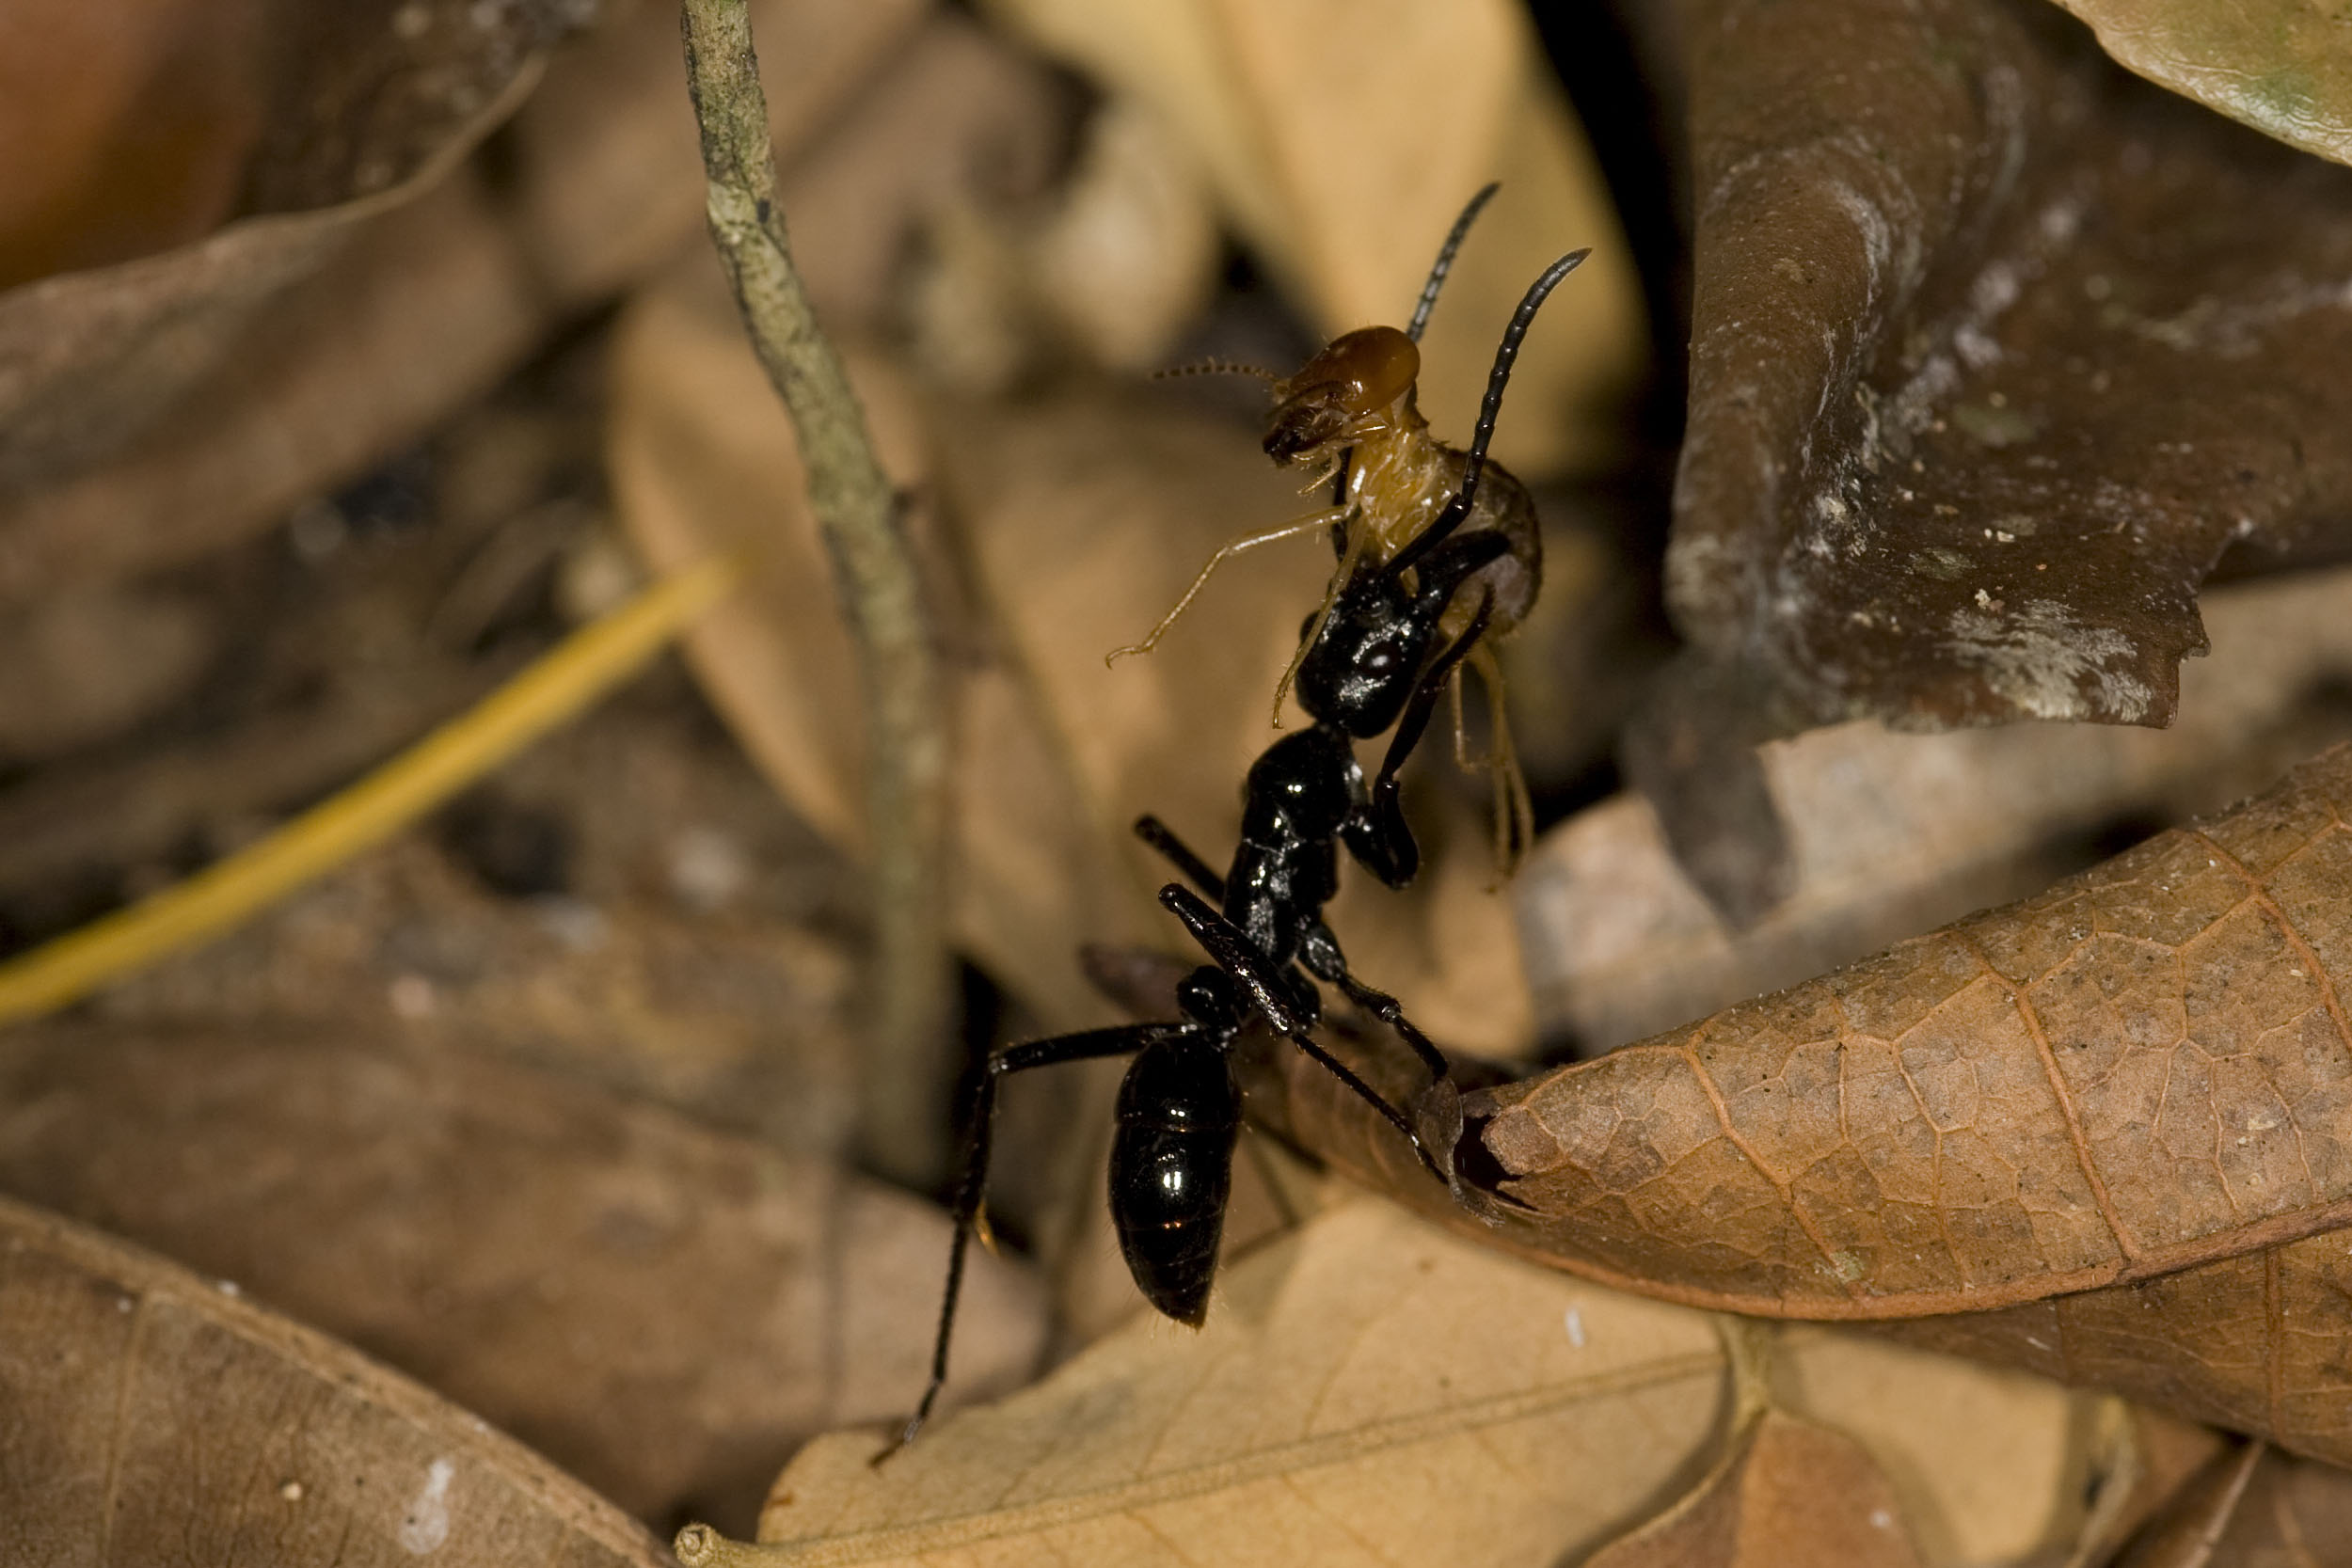 Giant ant holding an unfortunate inset in its powerful jaws